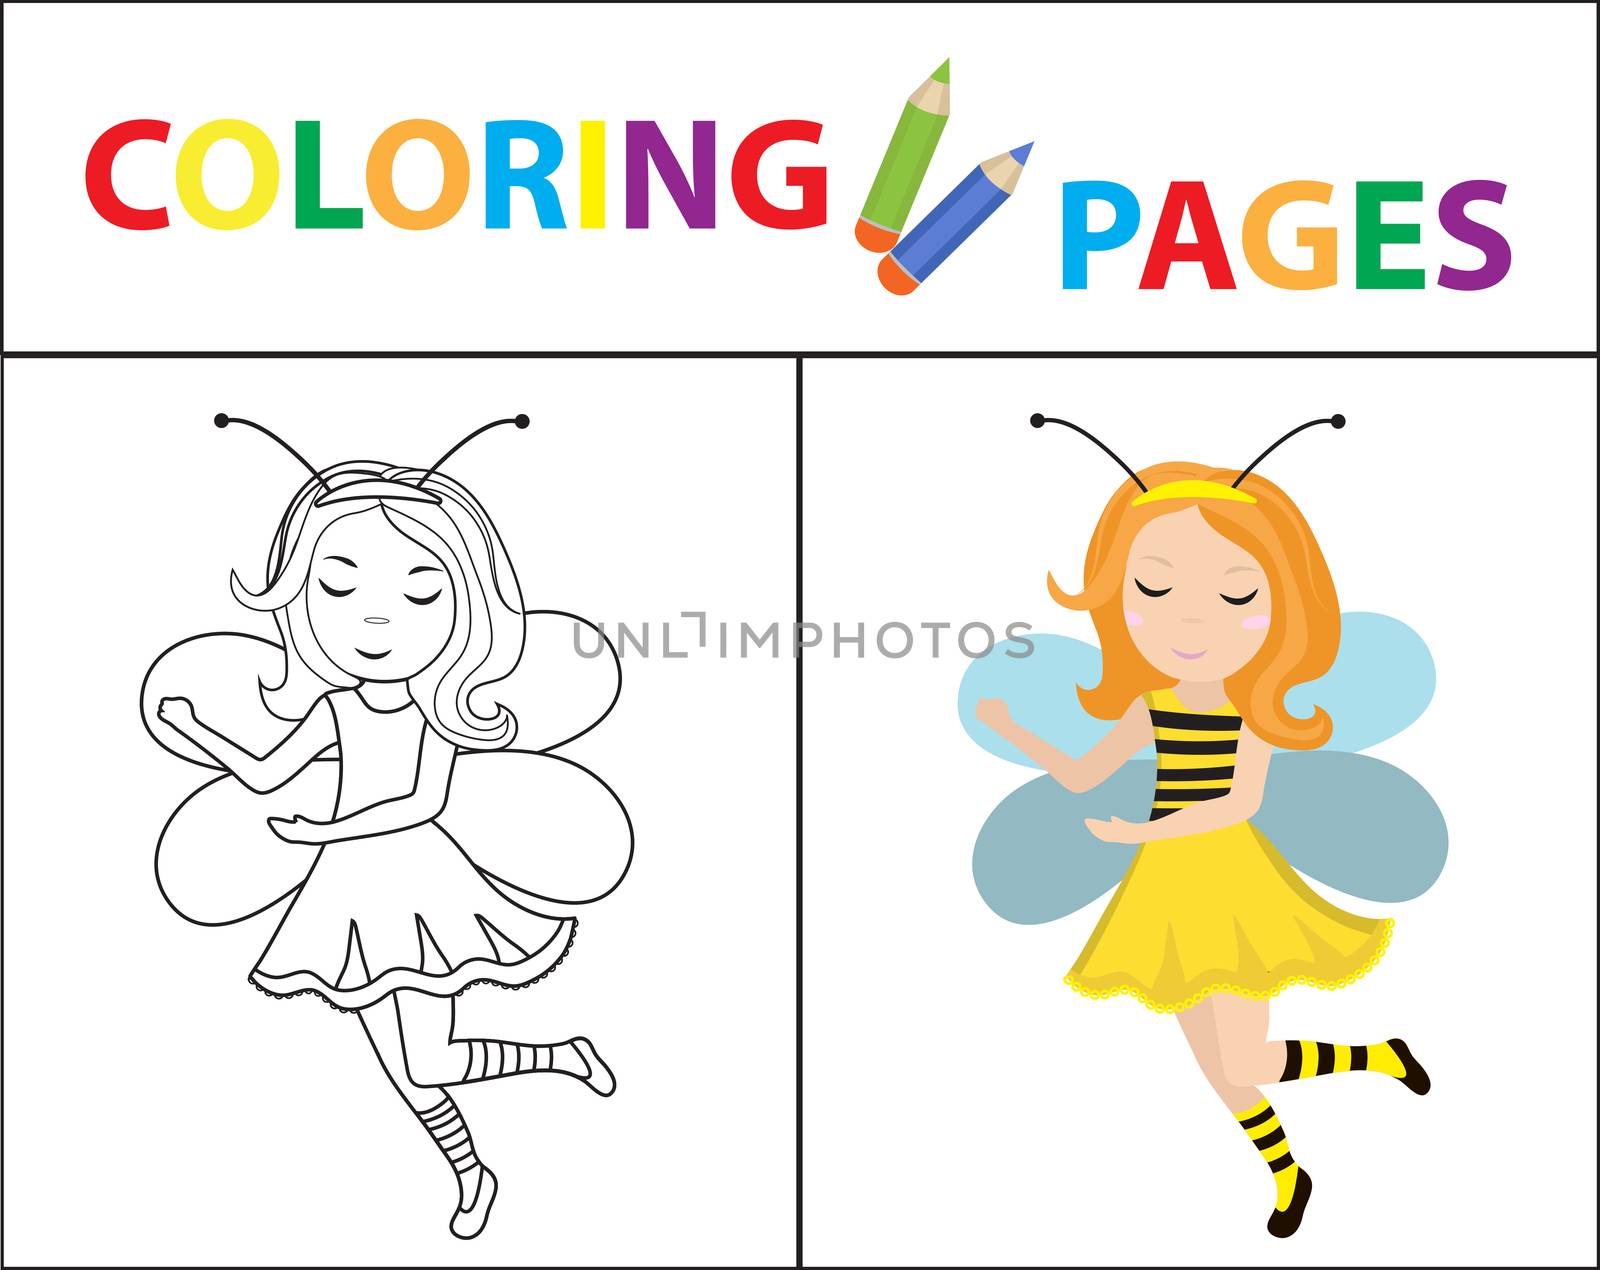 Coloring book page for kids. Girl bee carnival costume. Sketch outline and color version. Childrens education. illustration